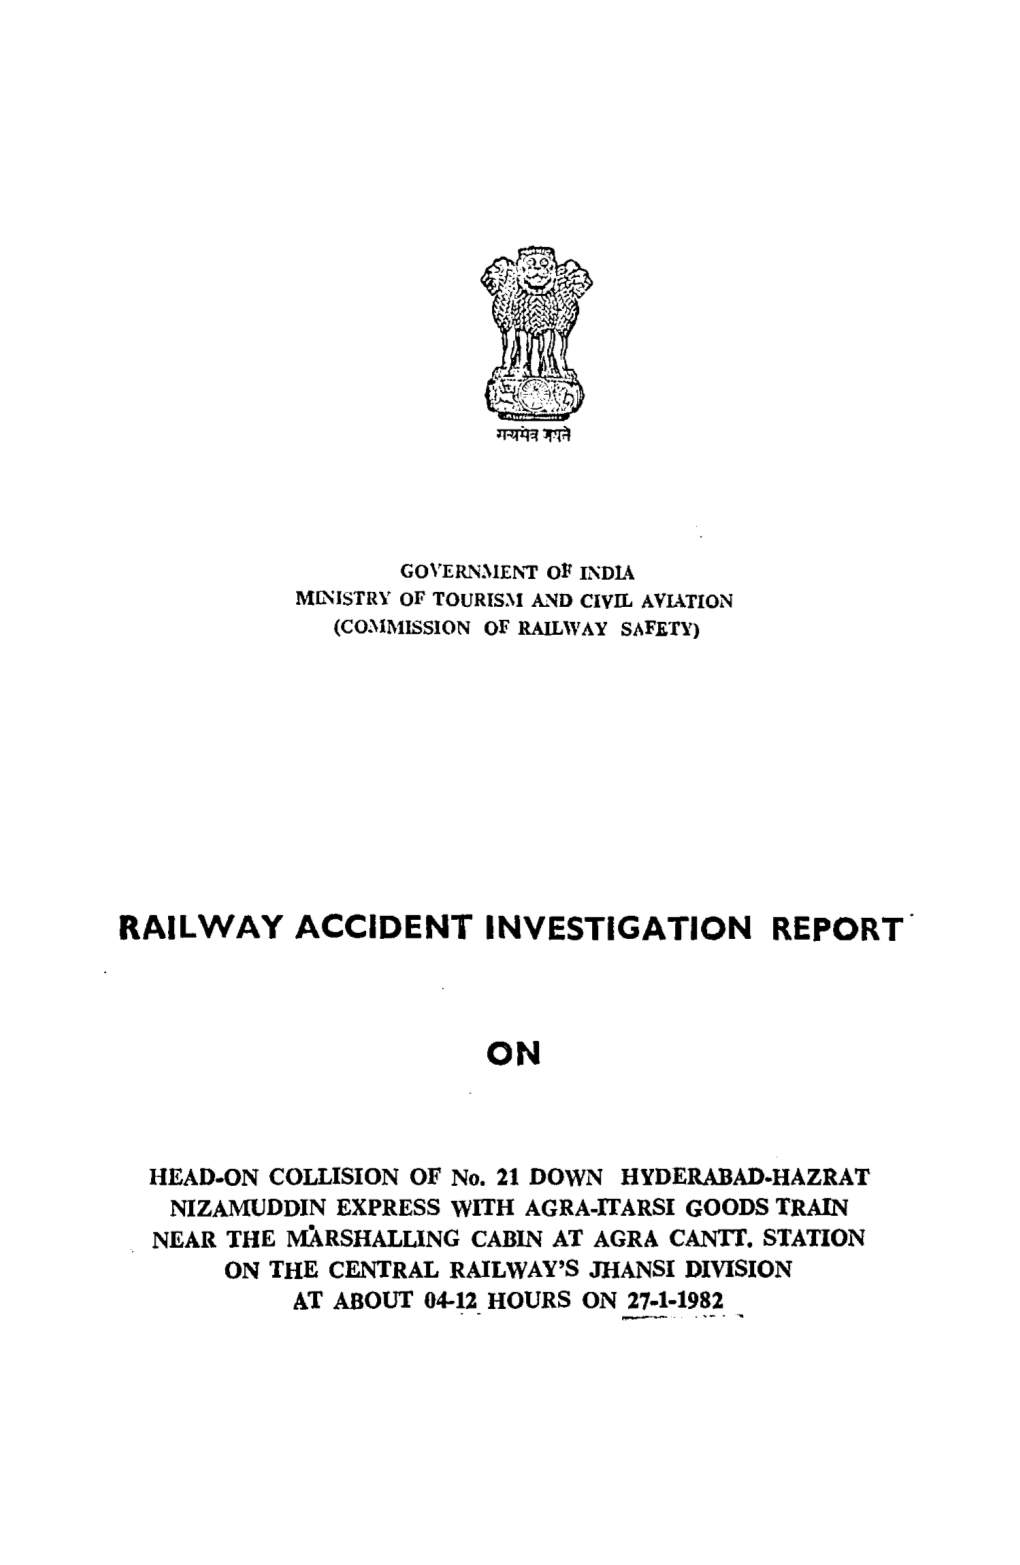 Railway Accident Investigation Report. On